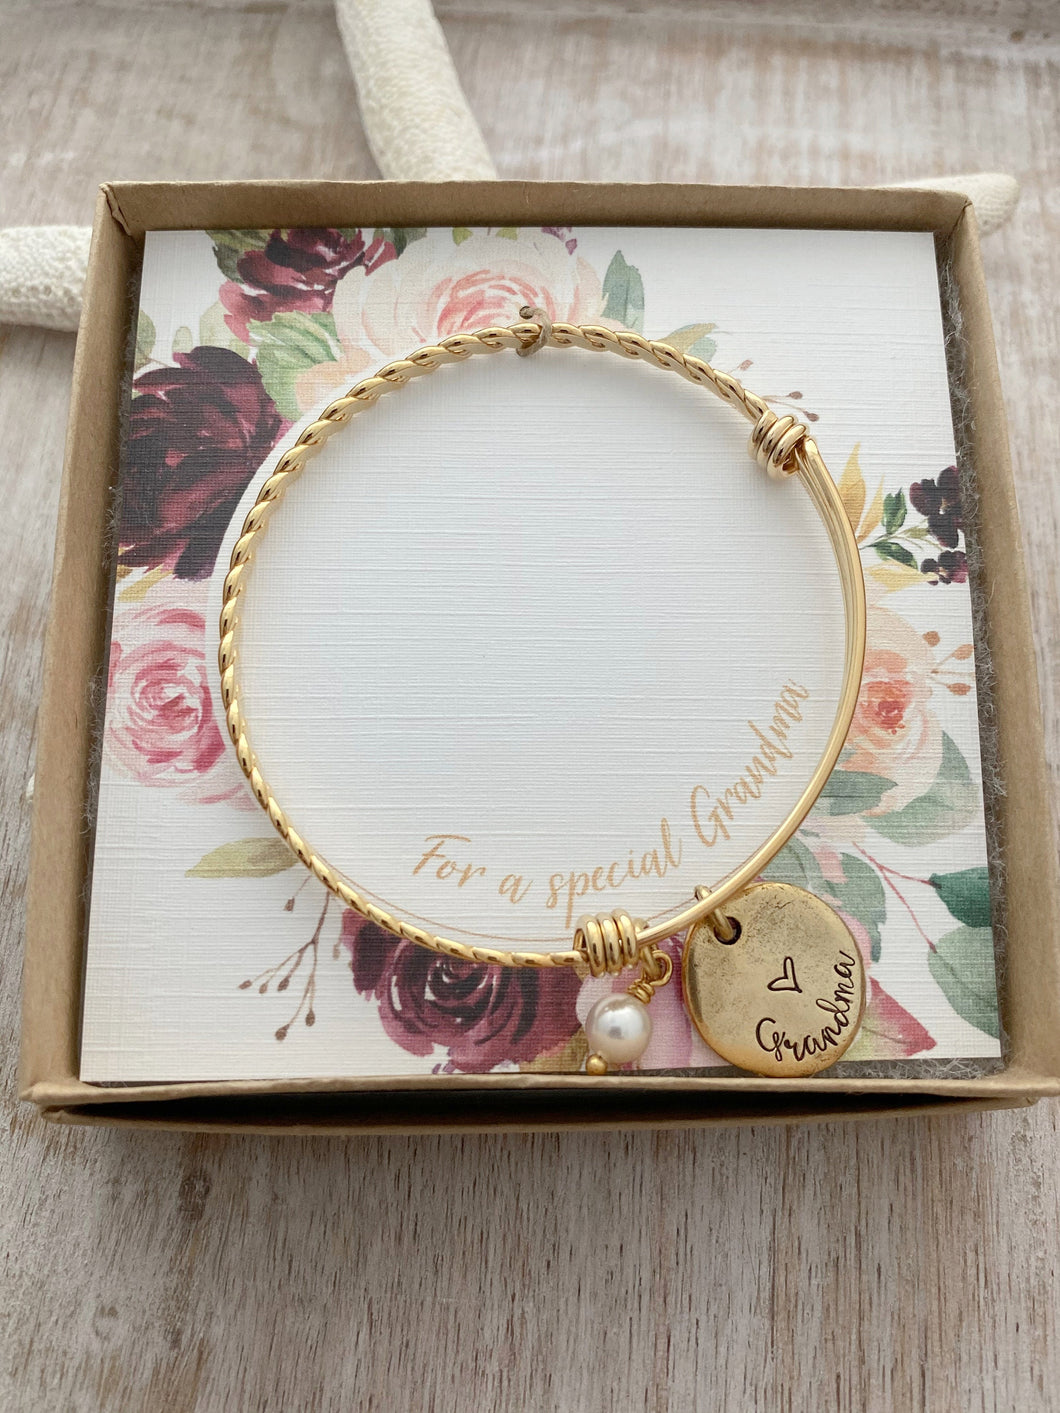 Gift for Grandma, silver or gold plated  stainless steel bangle bracelet disc and Pearl, Mother's Day gift for grandma with message card